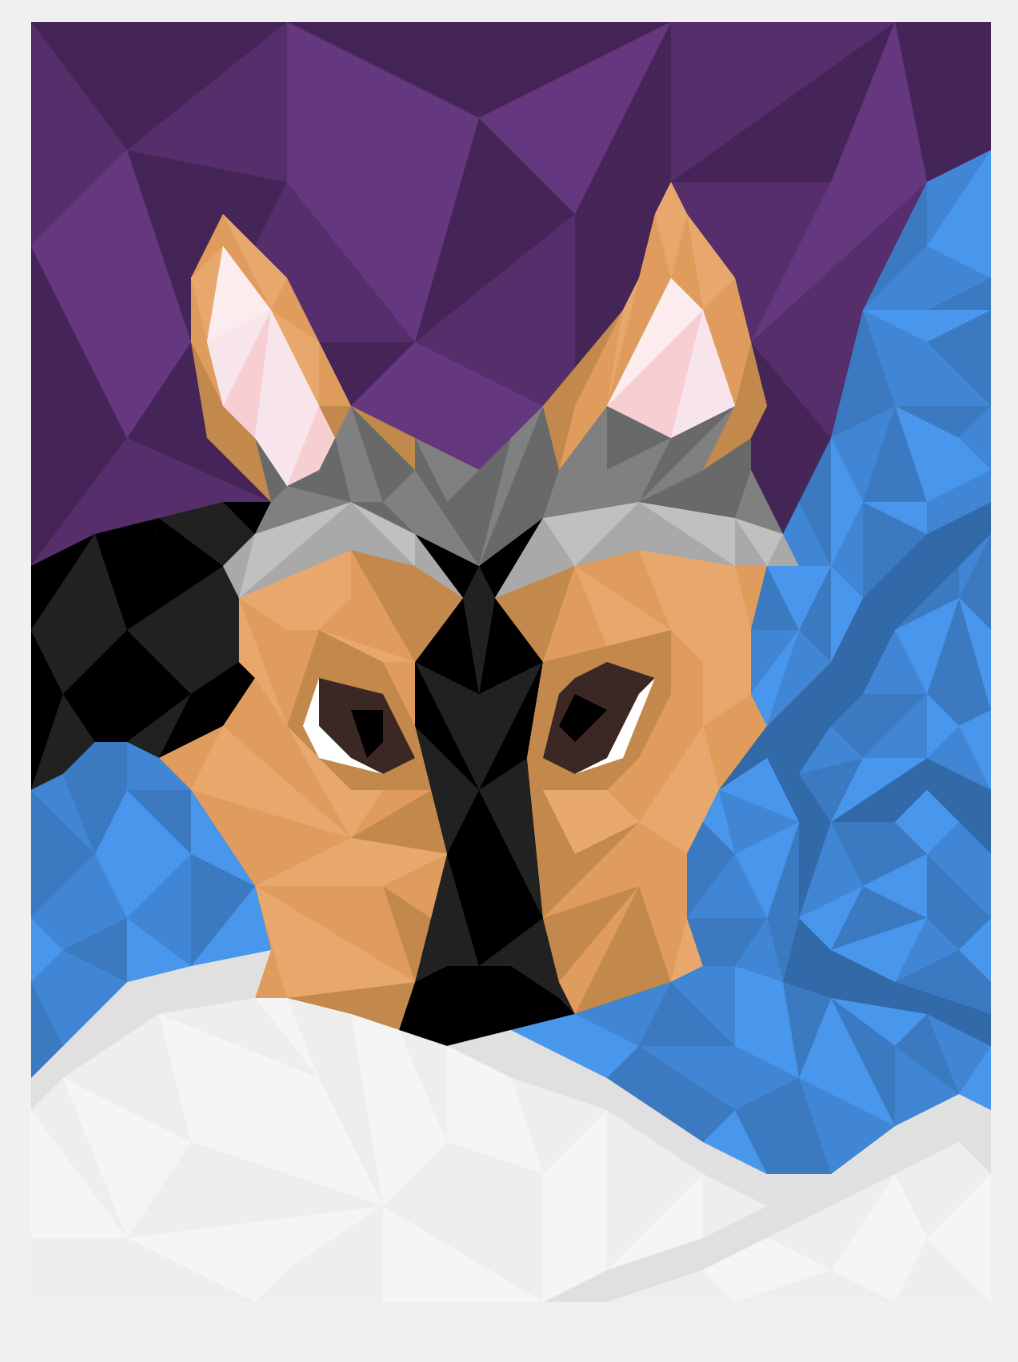 A dog’s face made of brown, gray, and black shapes on a background made of gray, black, purple, and blue shapes.